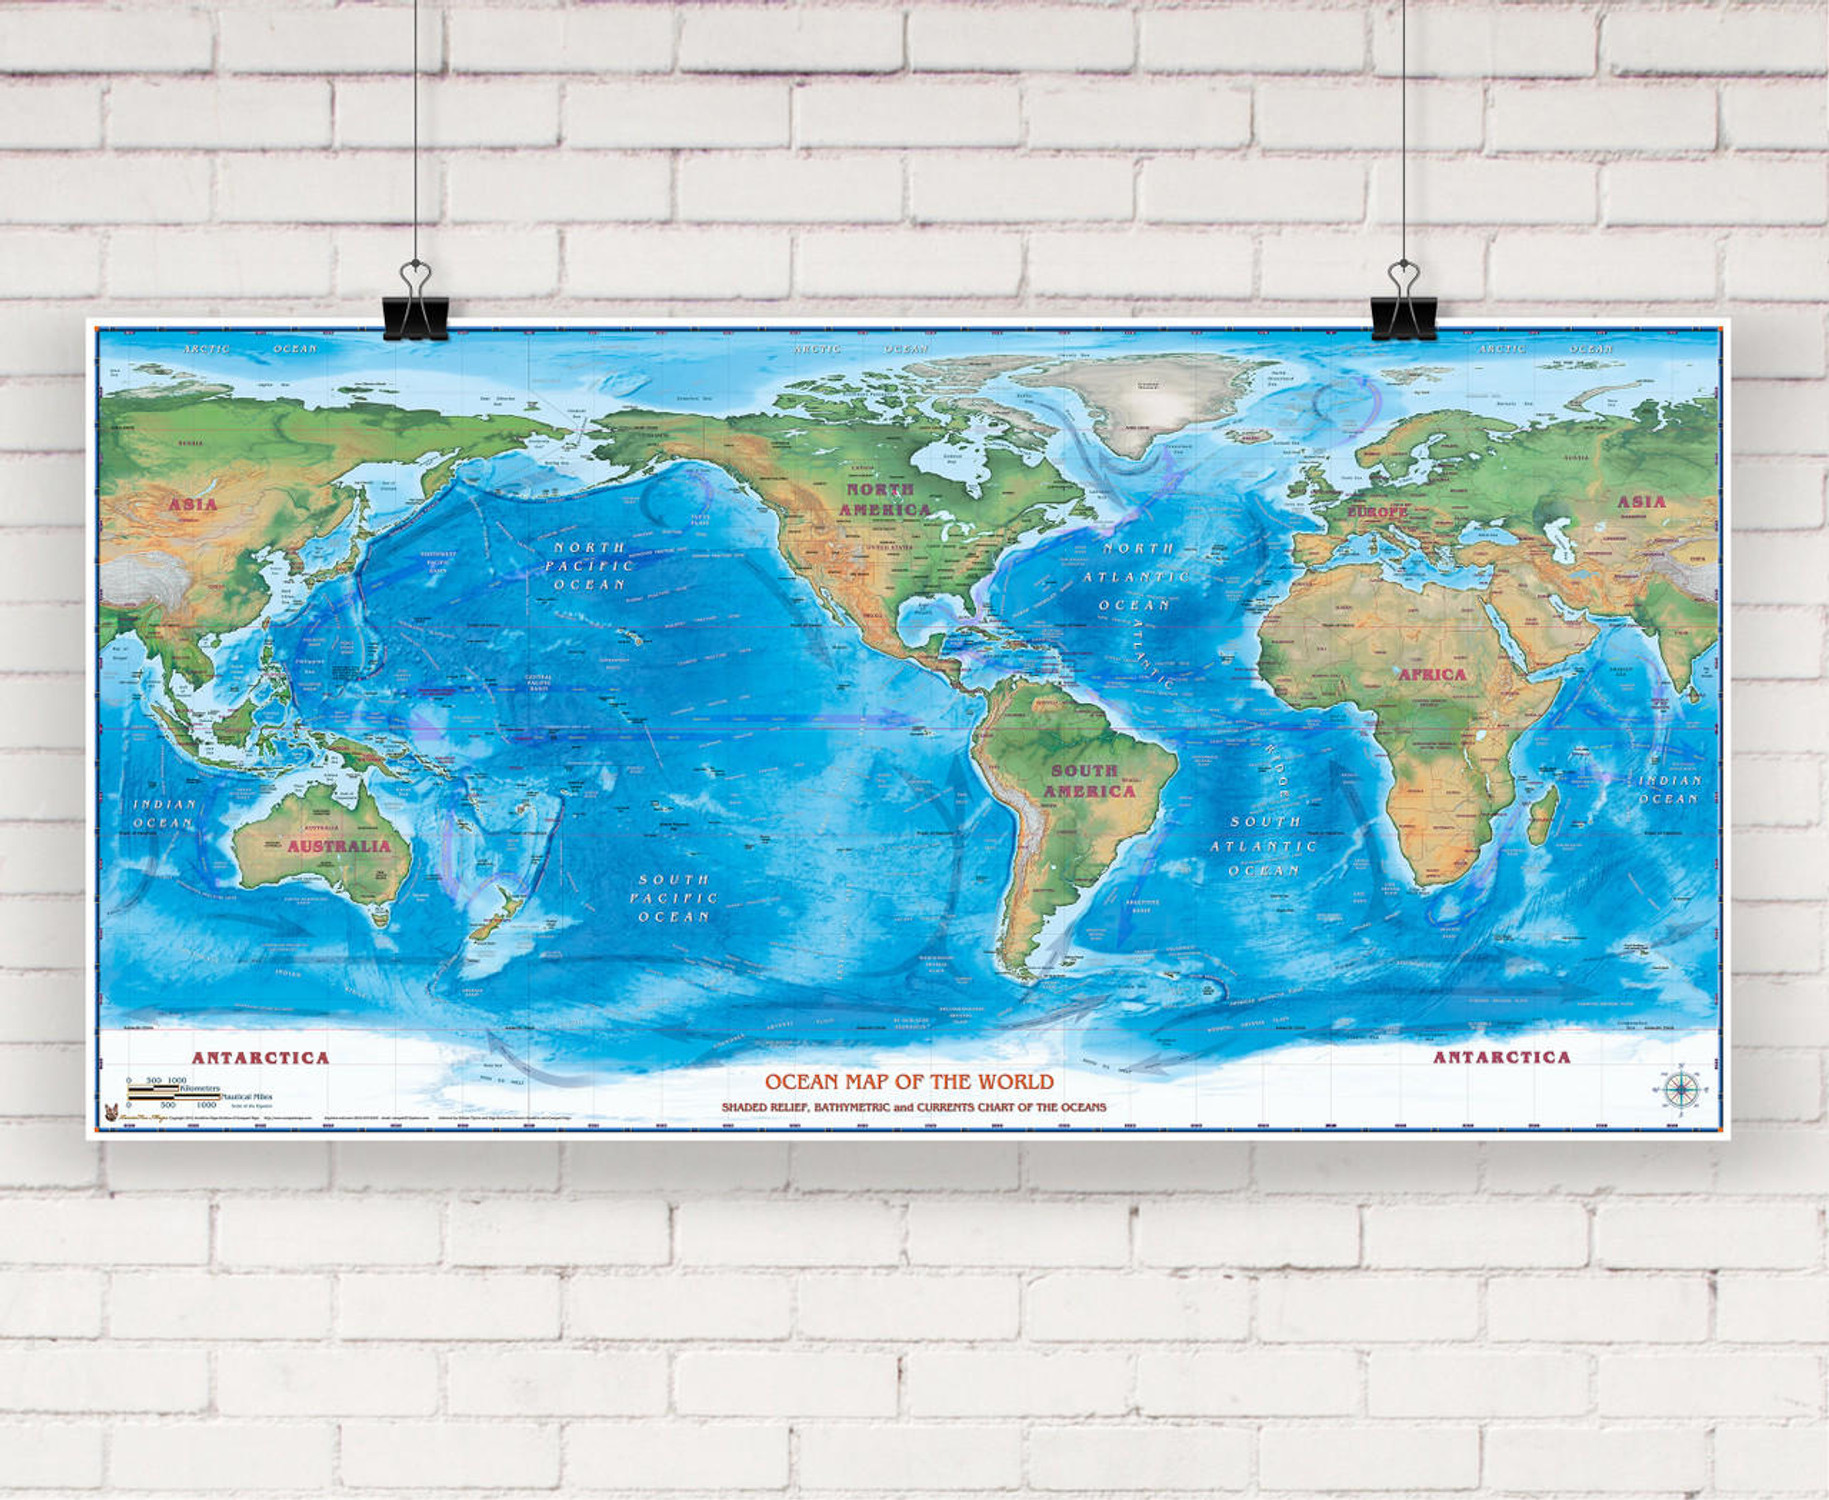 World Oceans Shaded Relief Wall Map by Compart Maps, image 2, World Maps Online